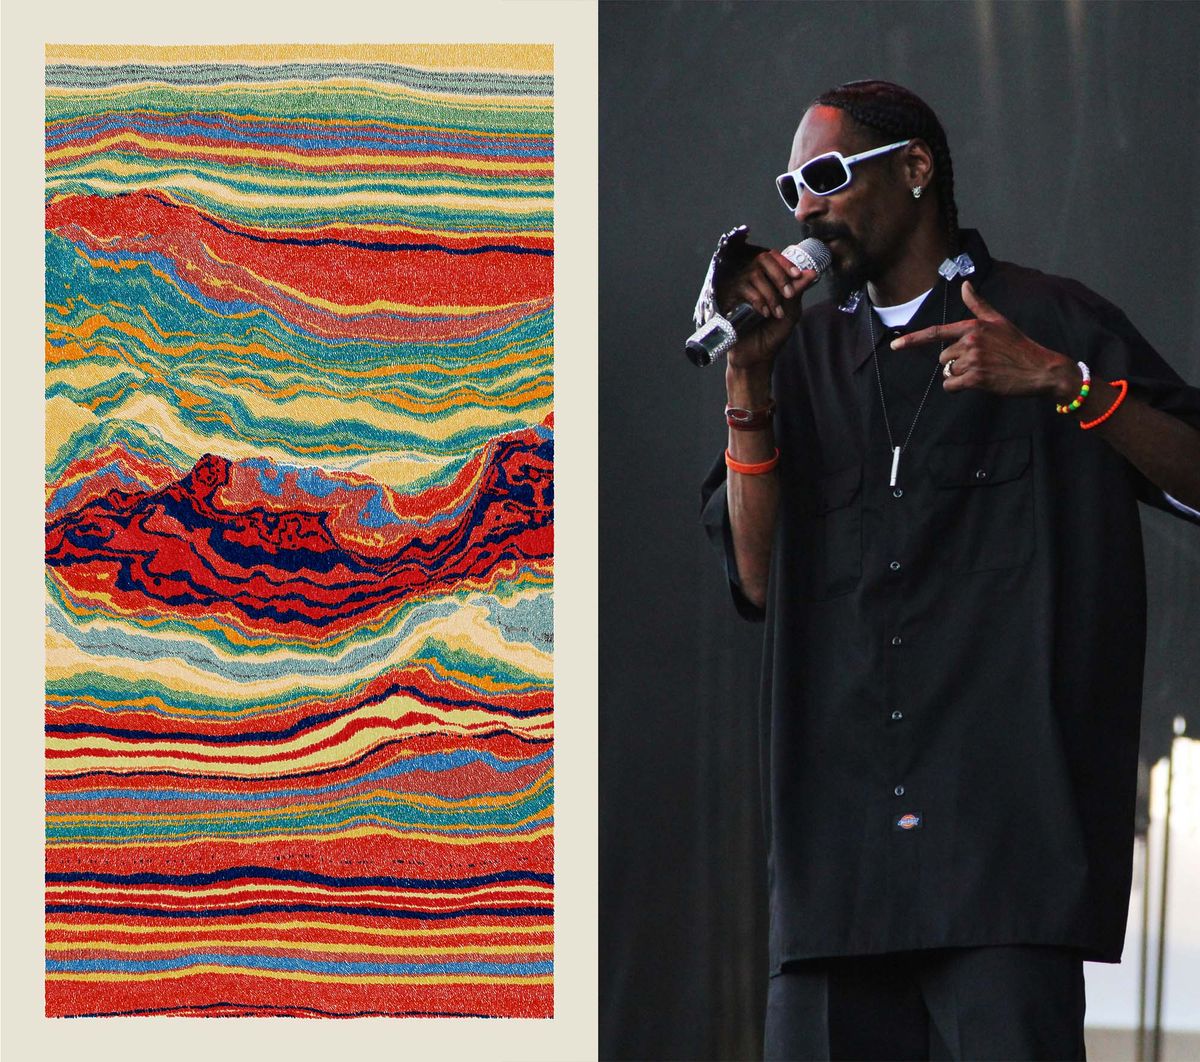 Left: Matt DesLauriers, Meridian #547, 2021, .JPG delivered as an NFT, Los Angeles County Museum of Art, gift of The Cozomo de' Medici Collection. Right: Snoop Dogg, who may be Cozomo de' Medici, performing at the Osheaga Festival in Montreal, Québec. NFT image: © Matt DesLauriers, image courtesy of the artist. Snoop Dogg photo: tkaravou, via Wikimedia Commons.